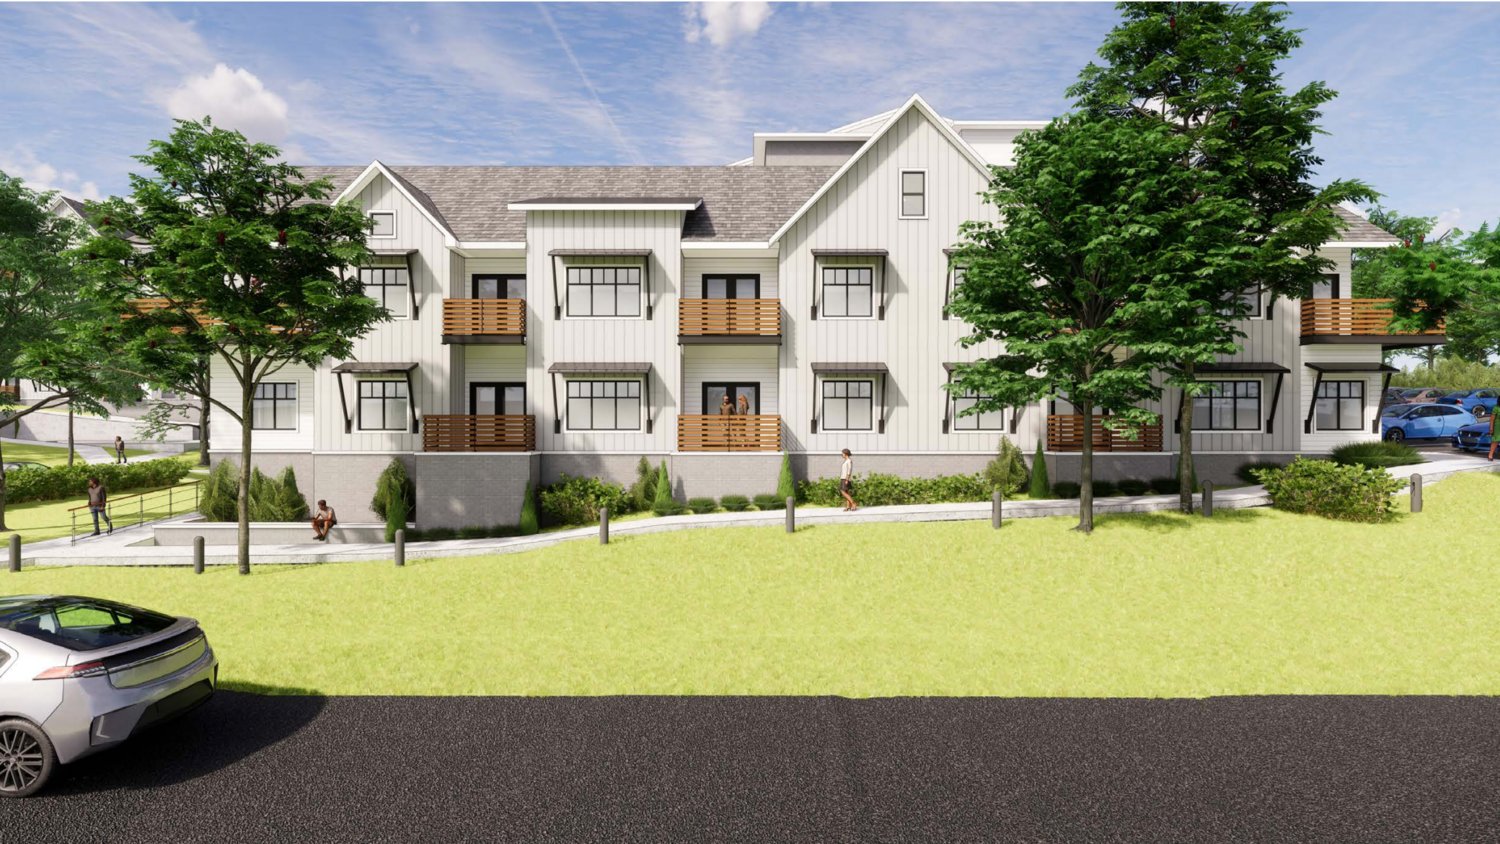 Elevation Development Co. and H Design Group LLC have reduced the project to 100 units in the multifamily portion.